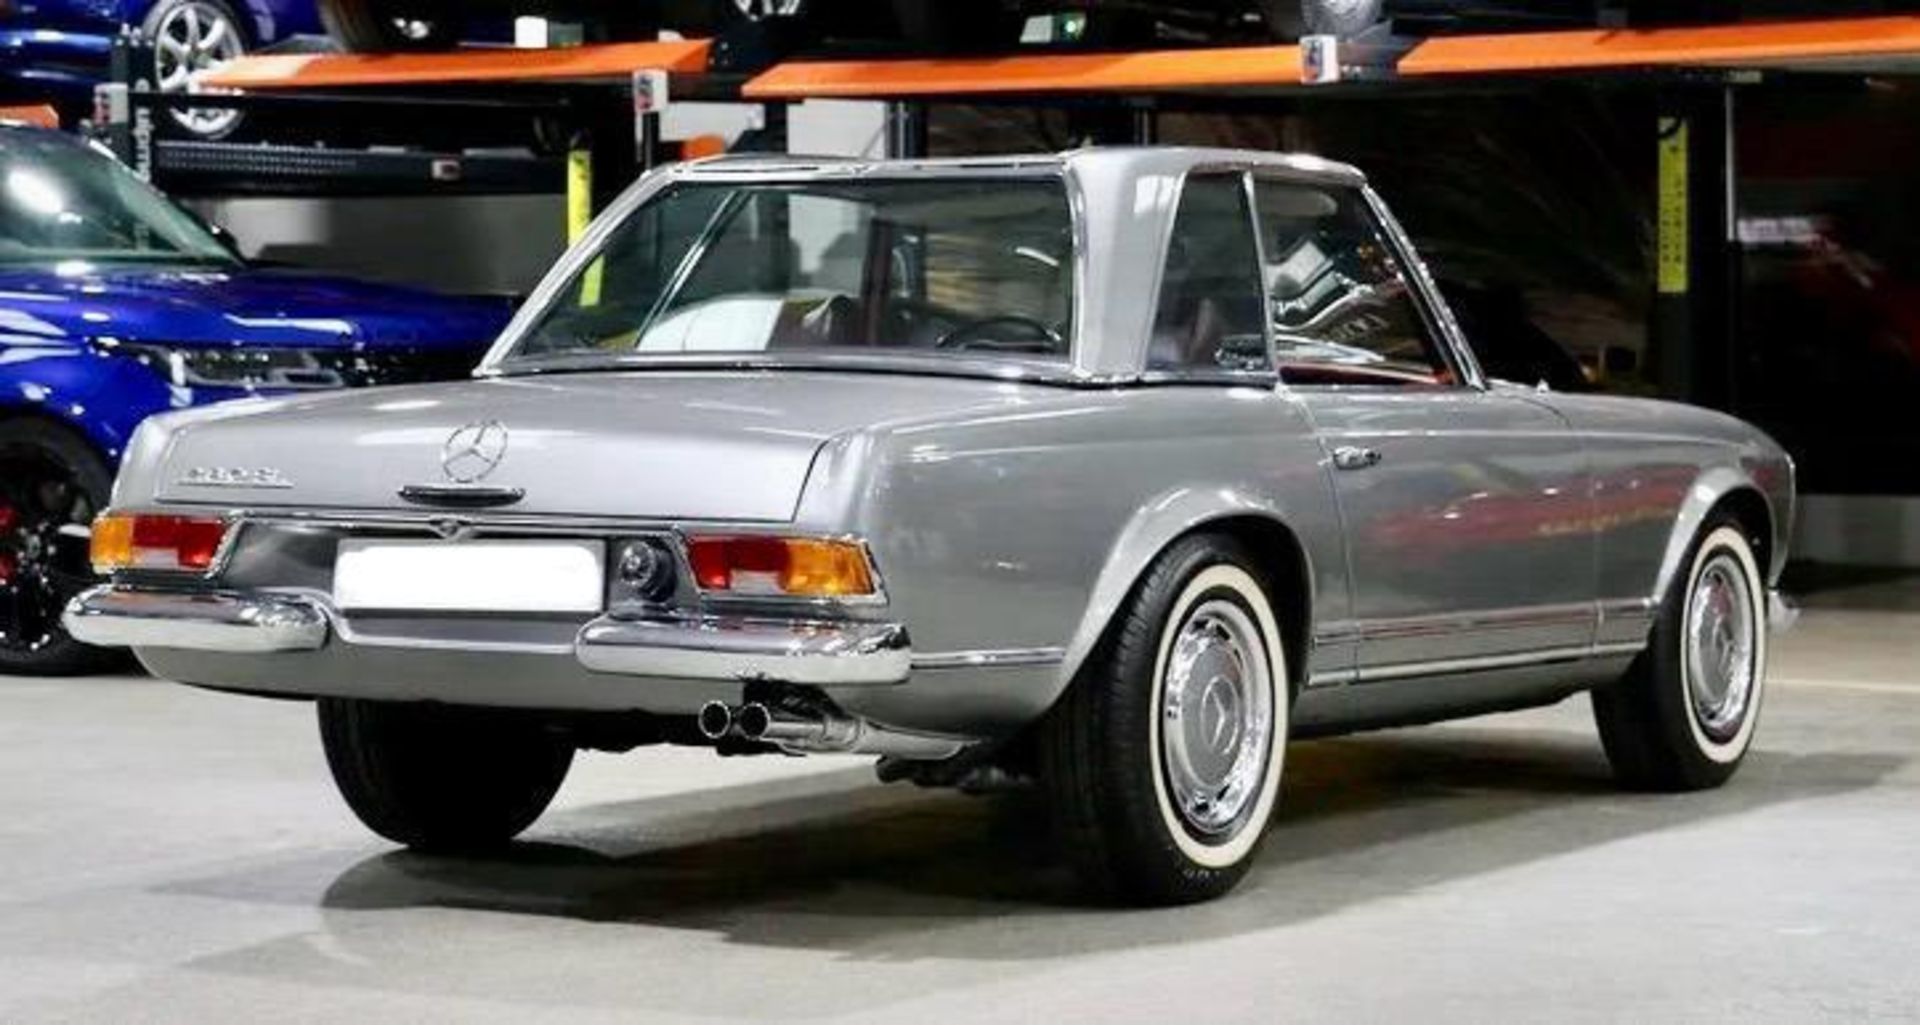 1969 MERCEDES-BENZ 280 SL, LHD MADE IN GERMANY, REGISTERED AND RESTORED IN DUBAI, CAR NOW IN THE UK - Image 4 of 15